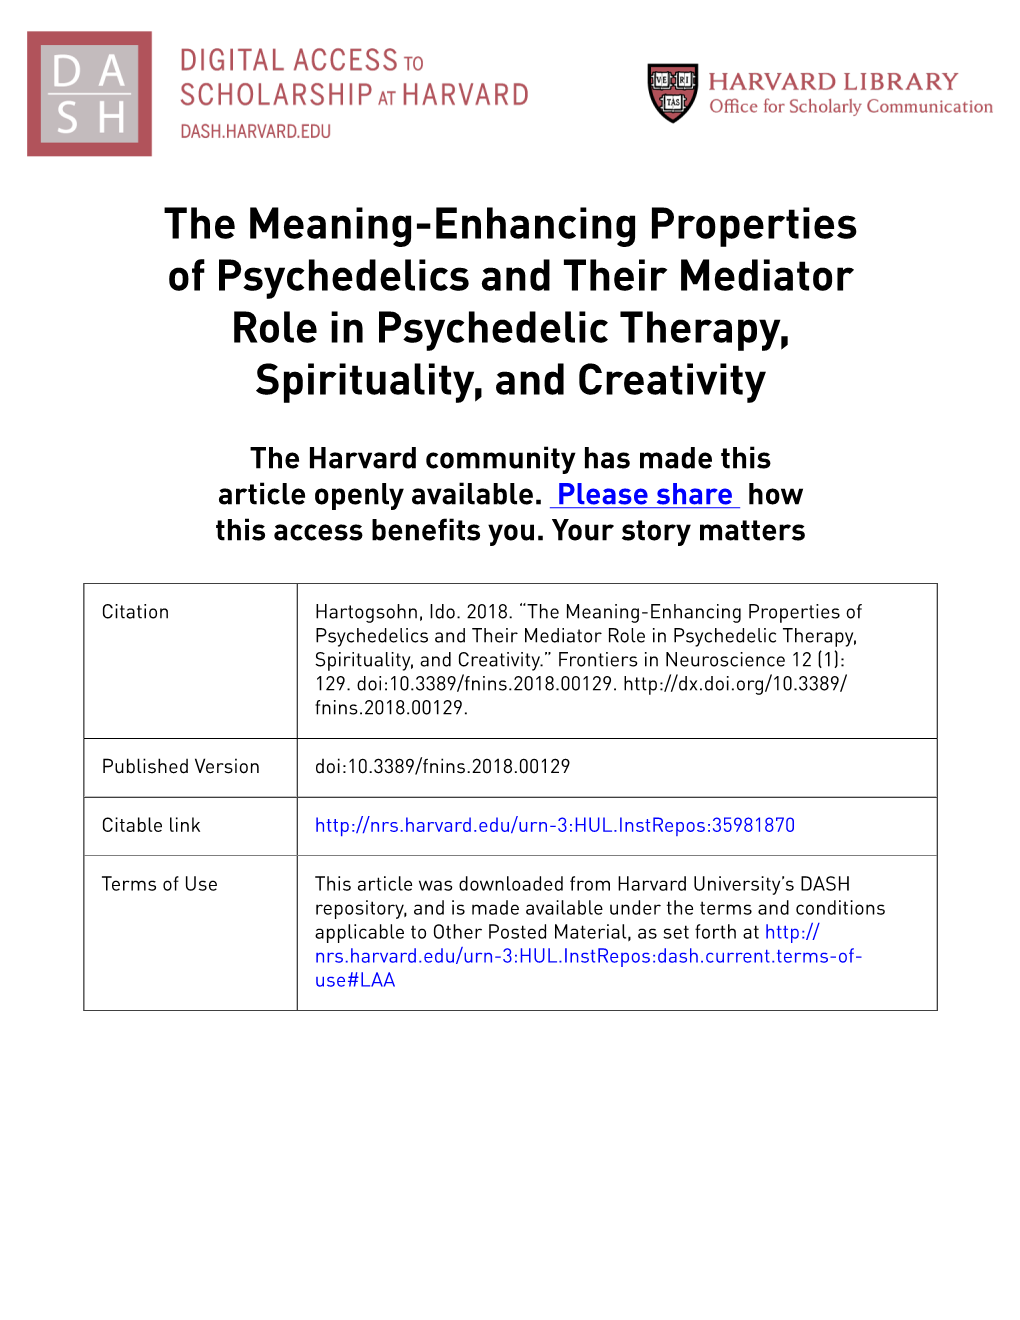 The Meaning-Enhancing Properties of Psychedelics and Their Mediator Role in Psychedelic Therapy, Spirituality, and Creativity